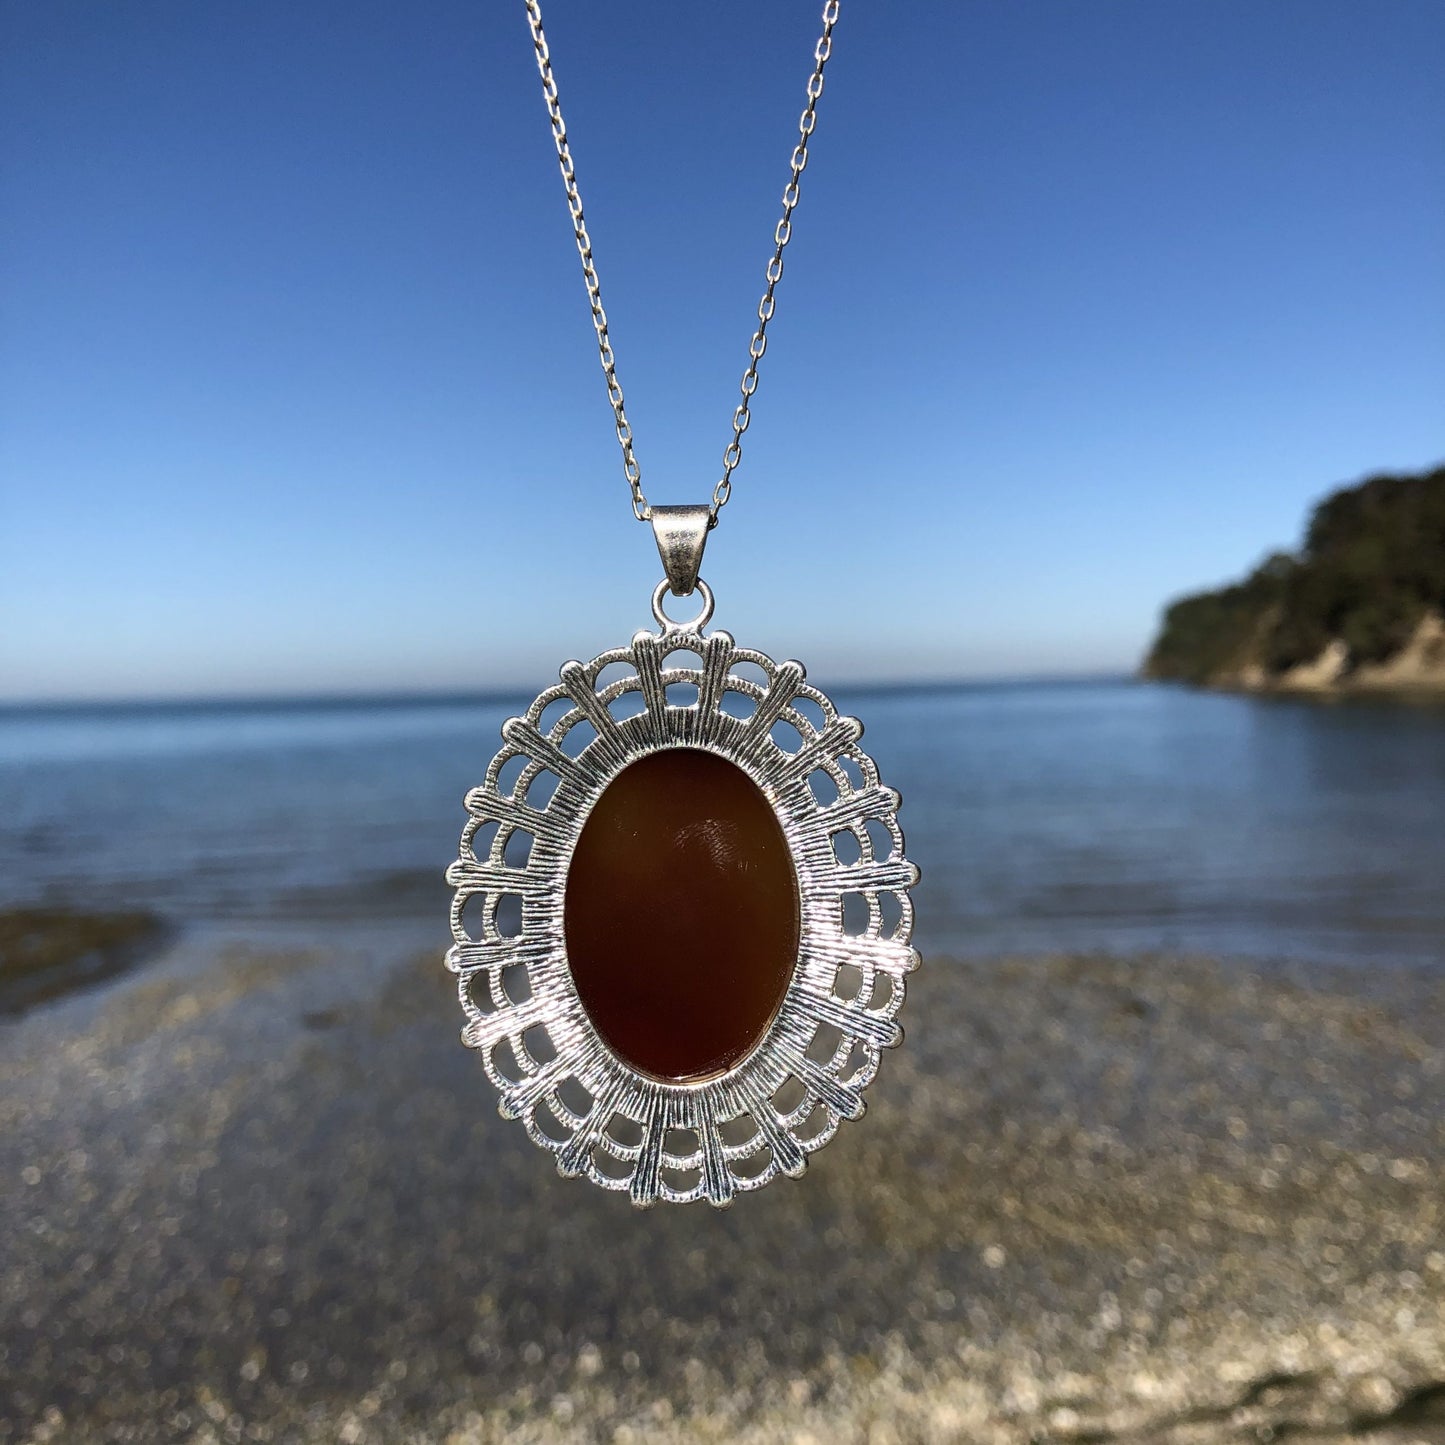 Necklace with large carnelian from Coromandel New Zealand with deep translucent orange color and side swirls of yellow/tan, hand polished to a 40x30mm cabochon and set in silver plated setting with 19 inch chain - on beach, back.